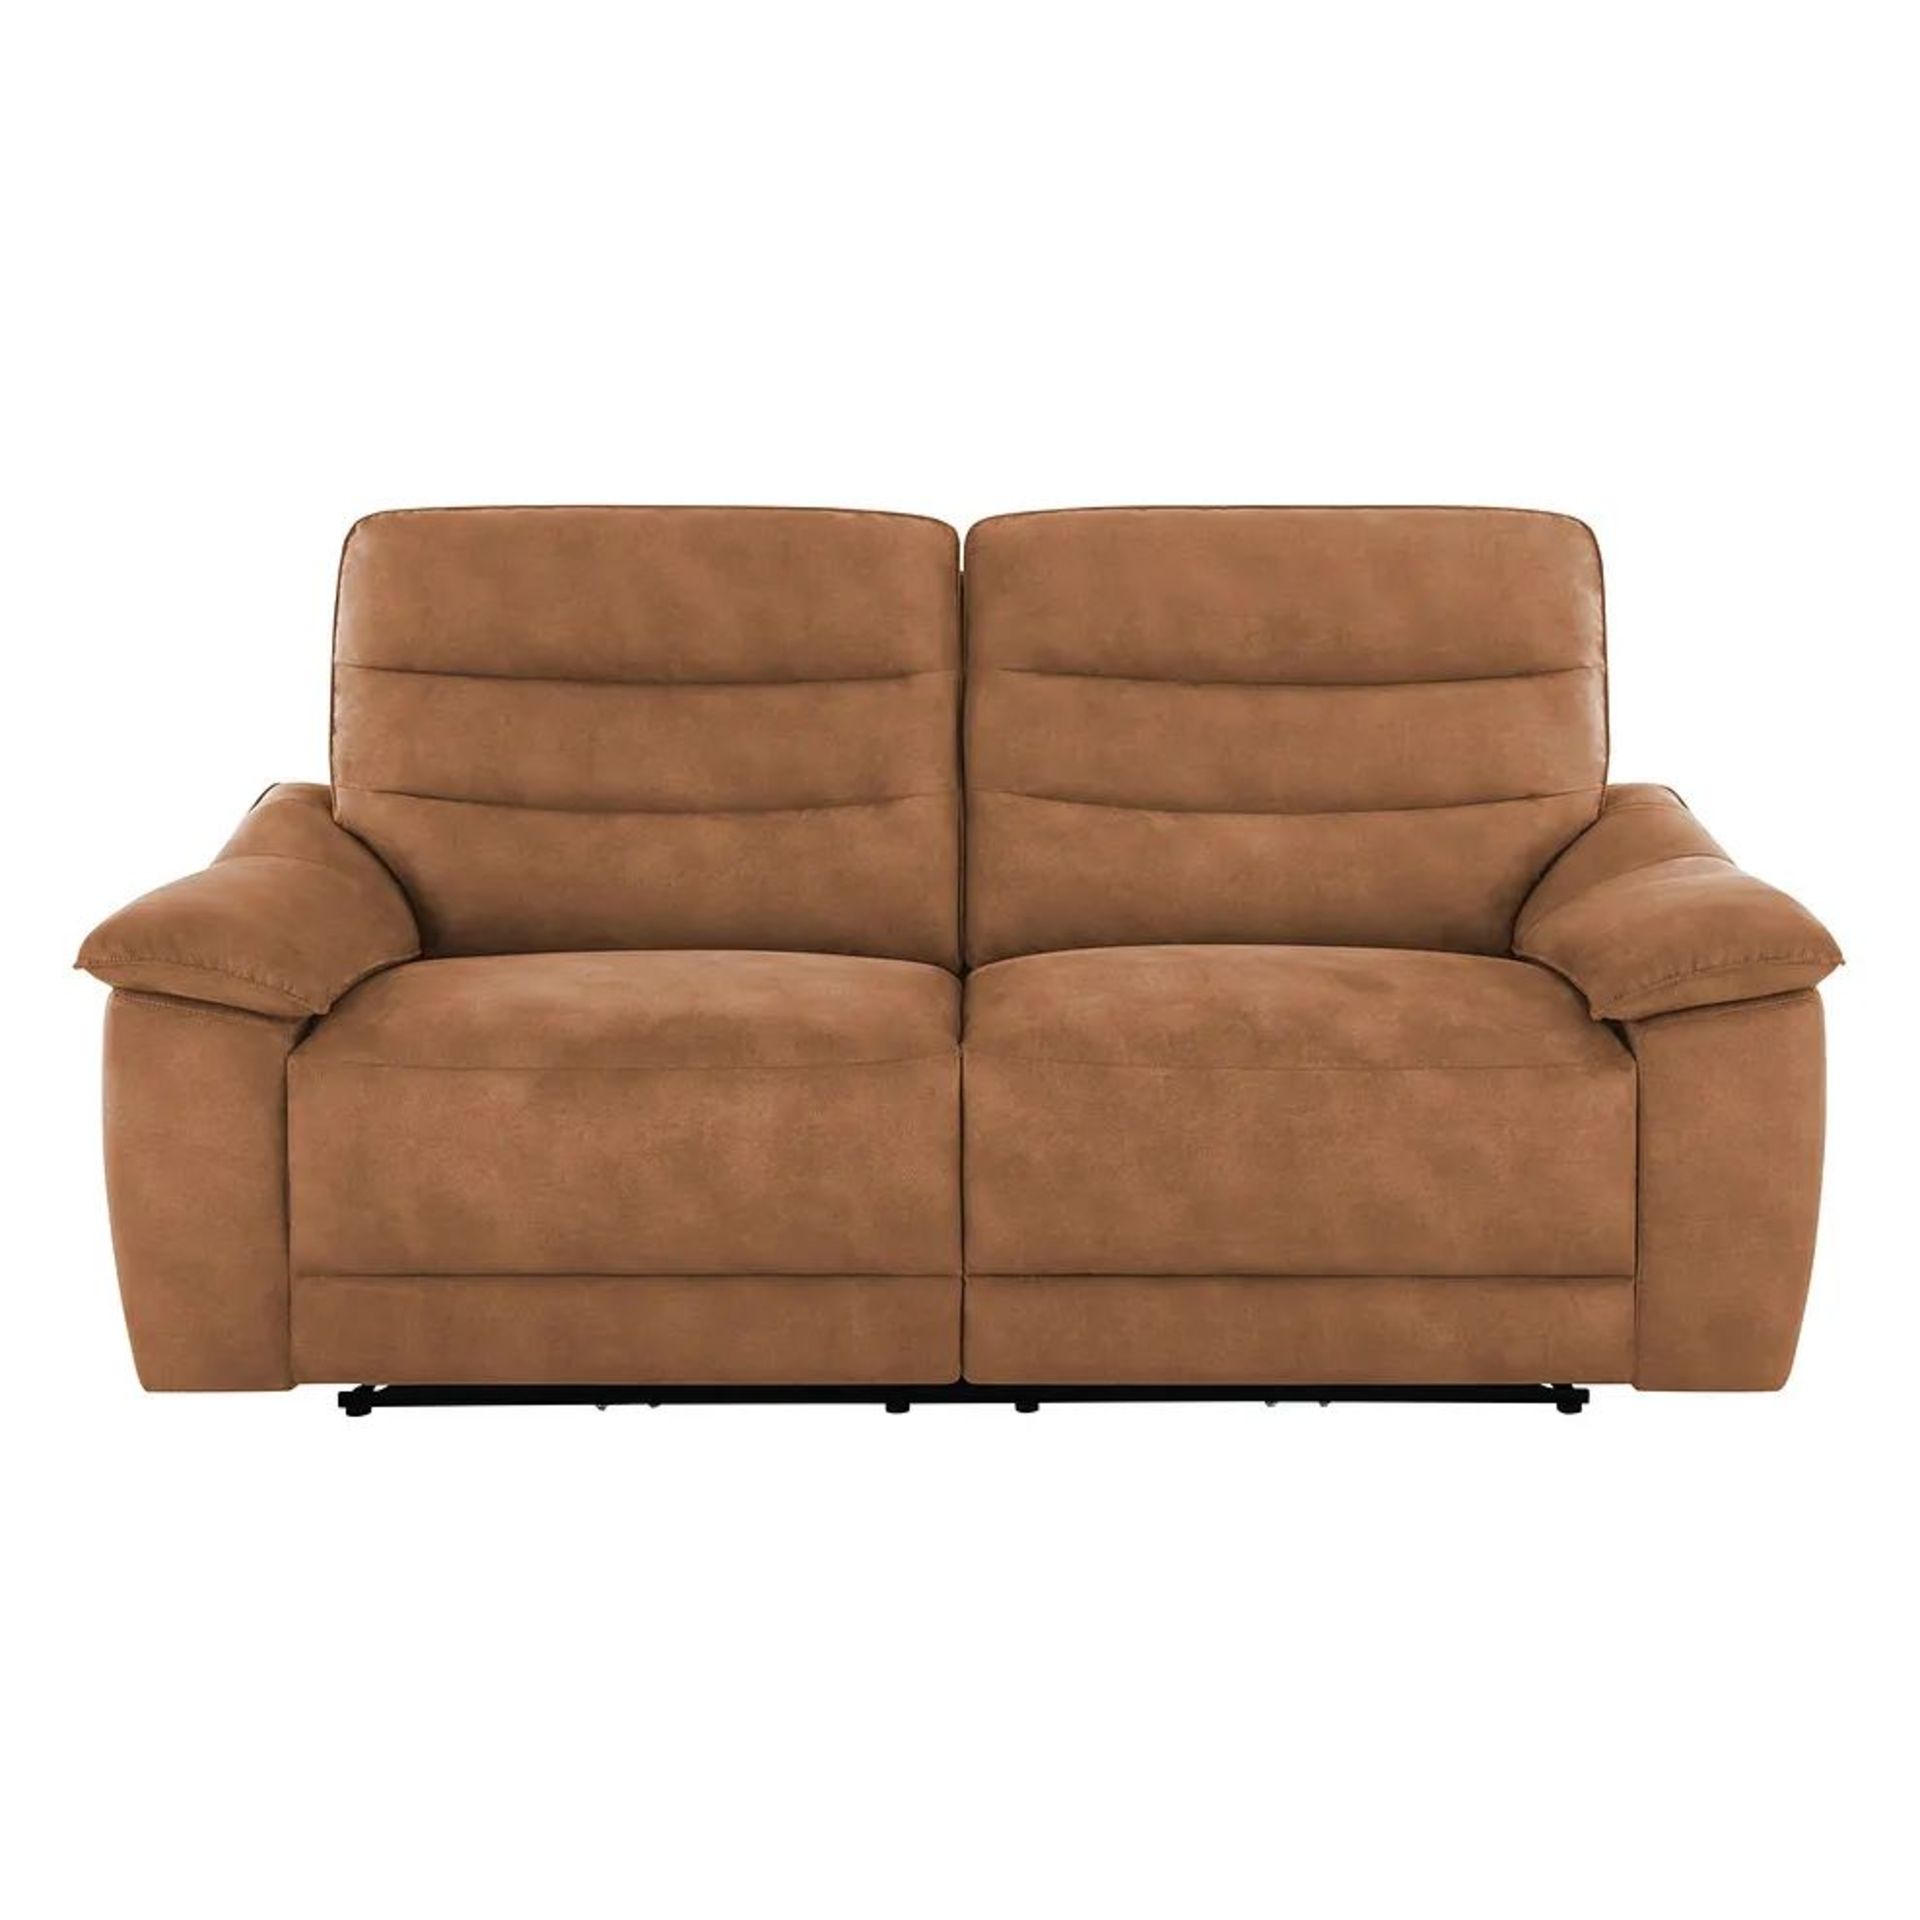 BRAND NEW CARTER 3 Seater Electric Recliner Sofa - BROWN FABRIC. RRP £1299. Shown here in Ranch - Image 2 of 12